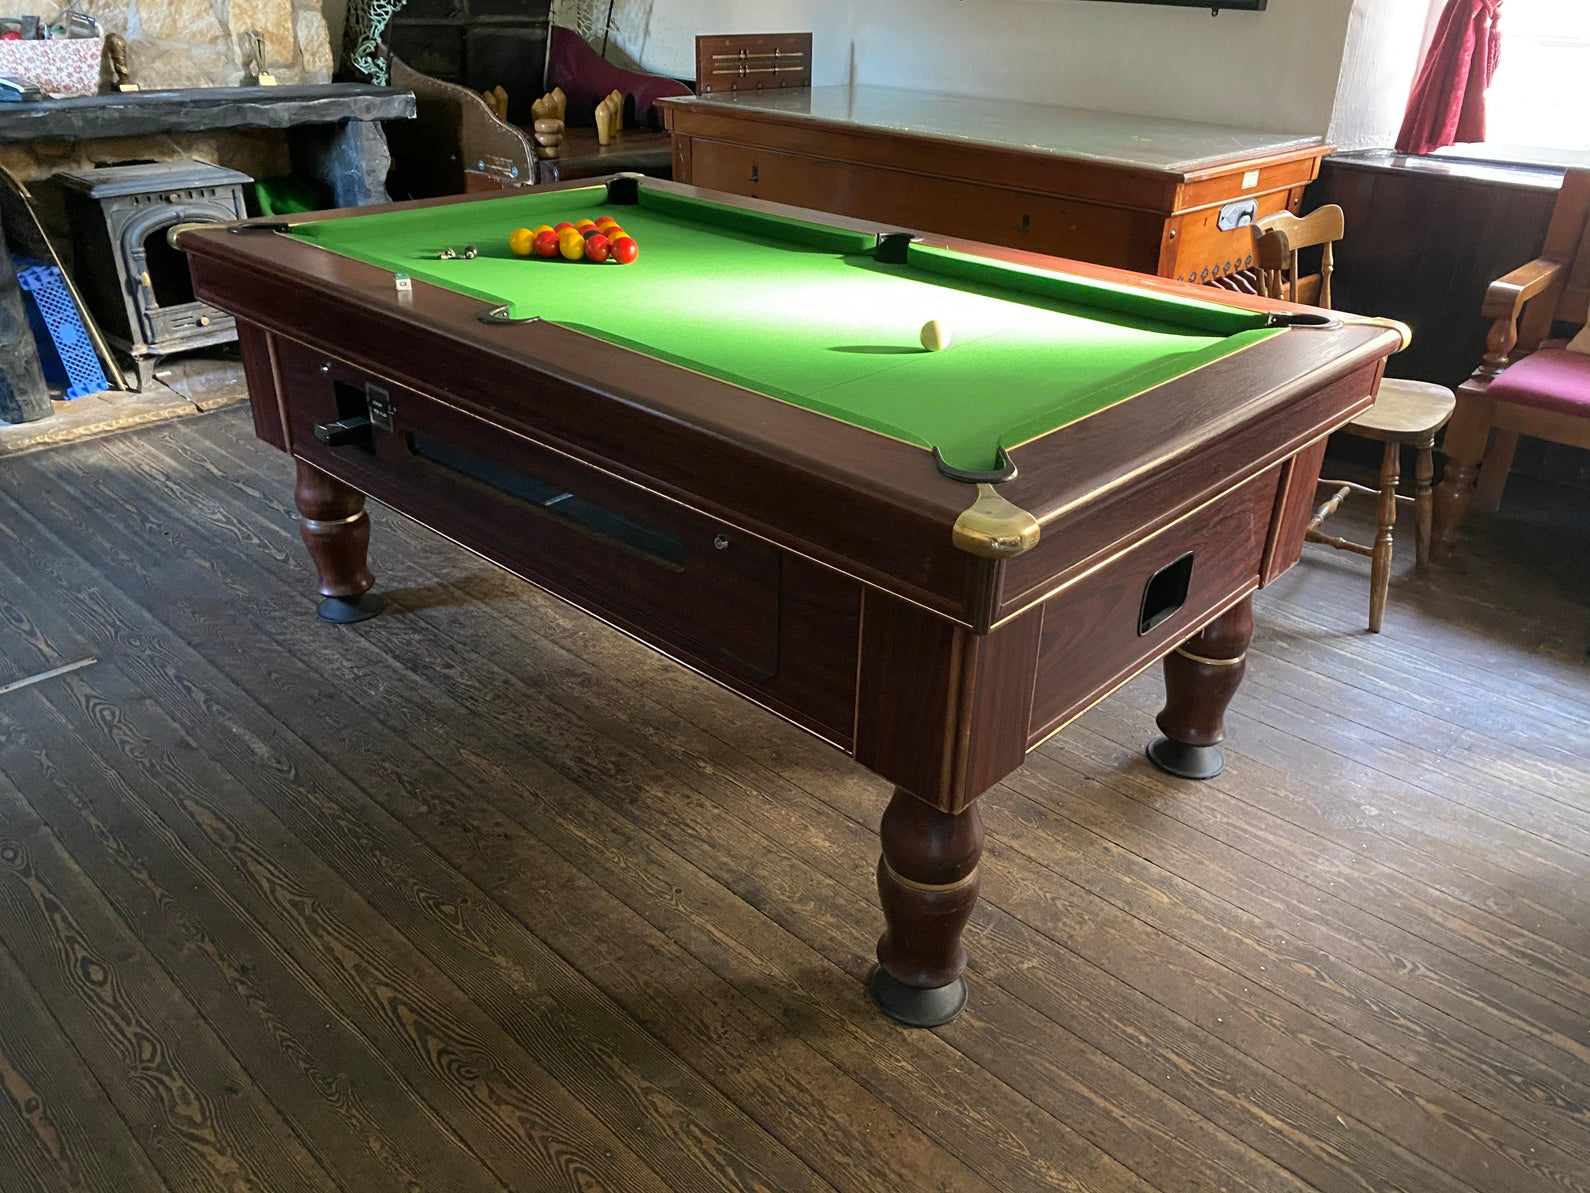 Excel Mayfair 6' x 3' Reconditioned Pool table